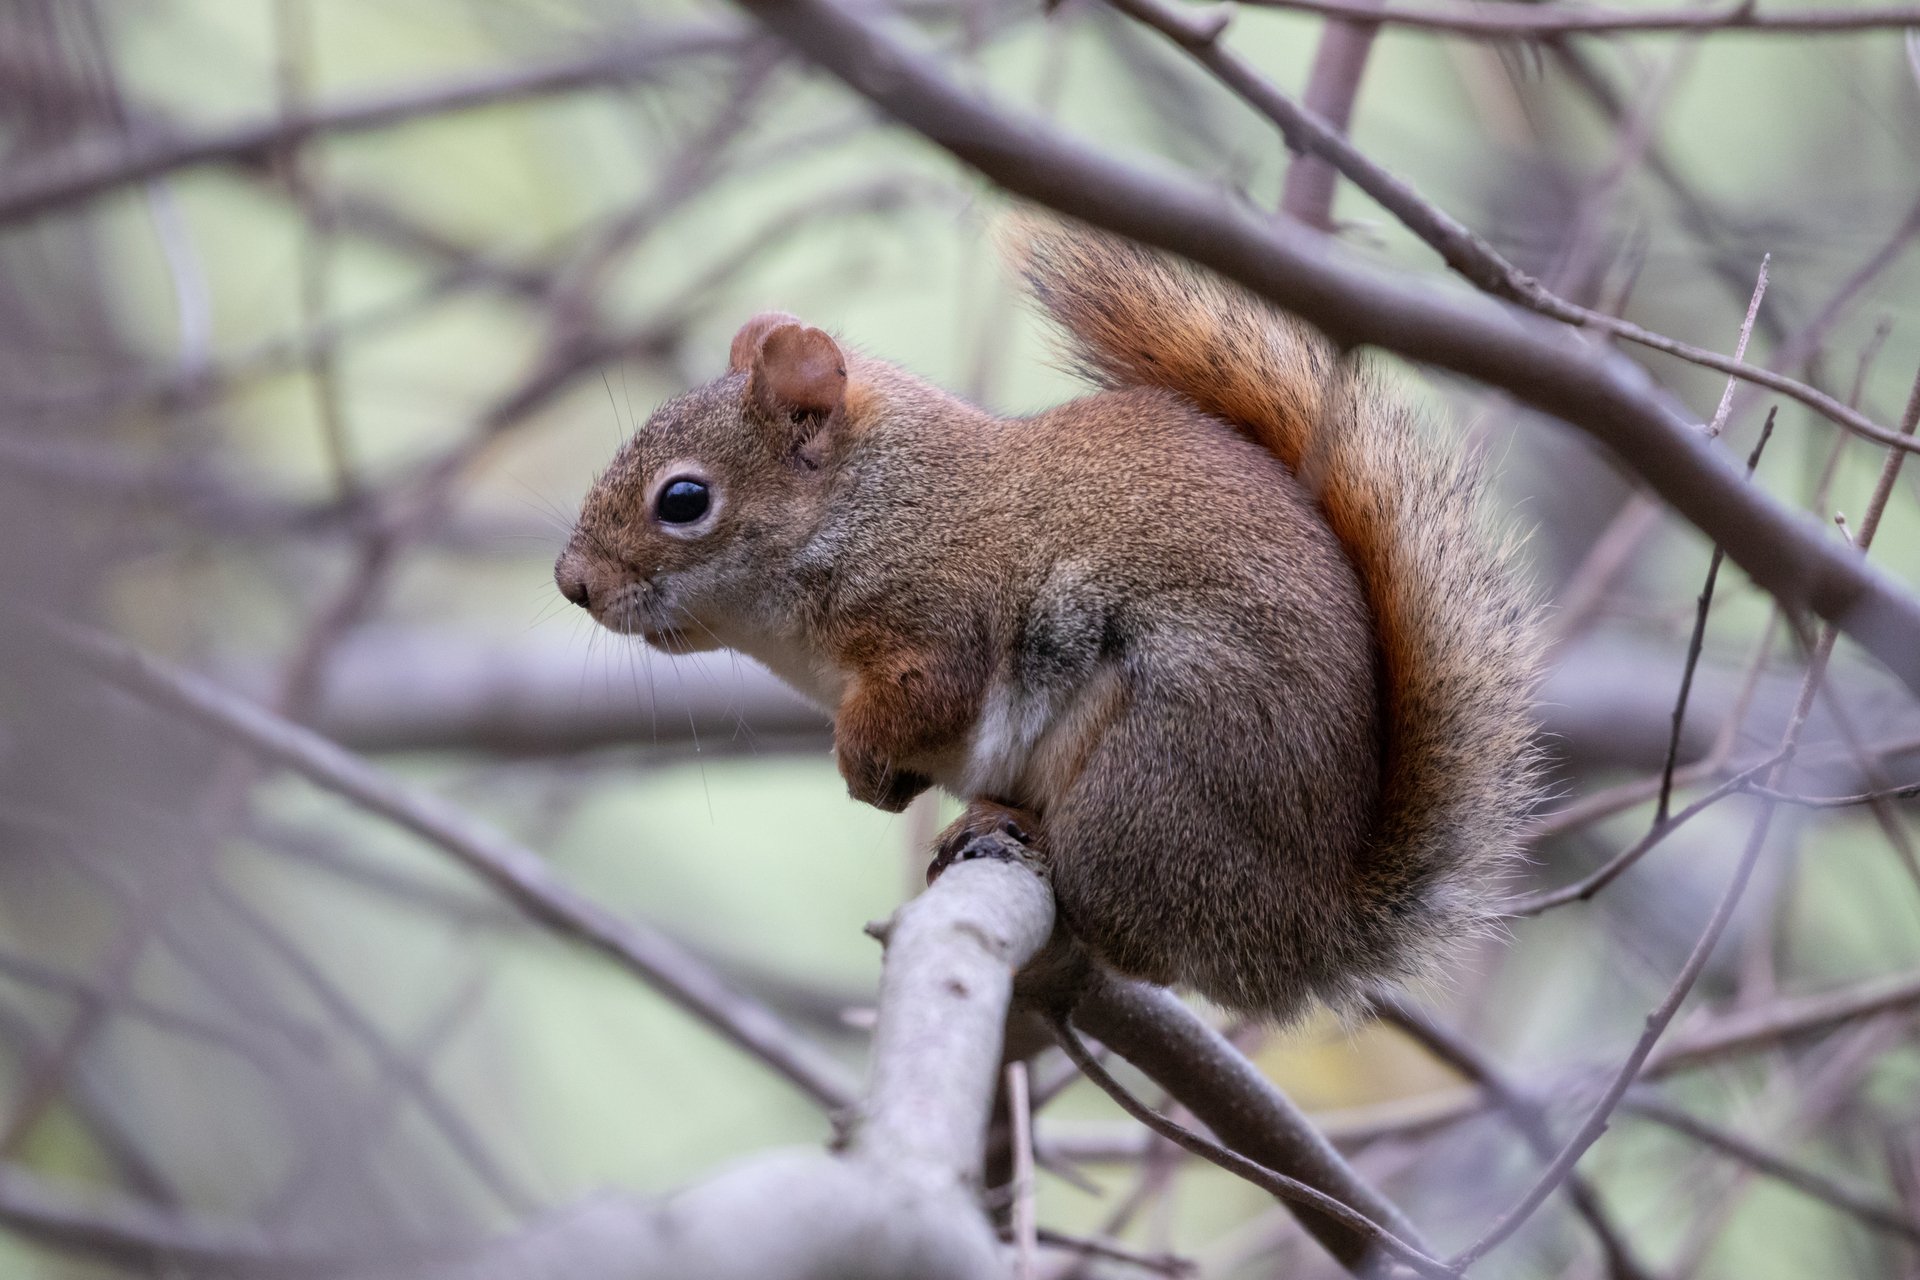 A red squirrel hunched over, standing on a twig.